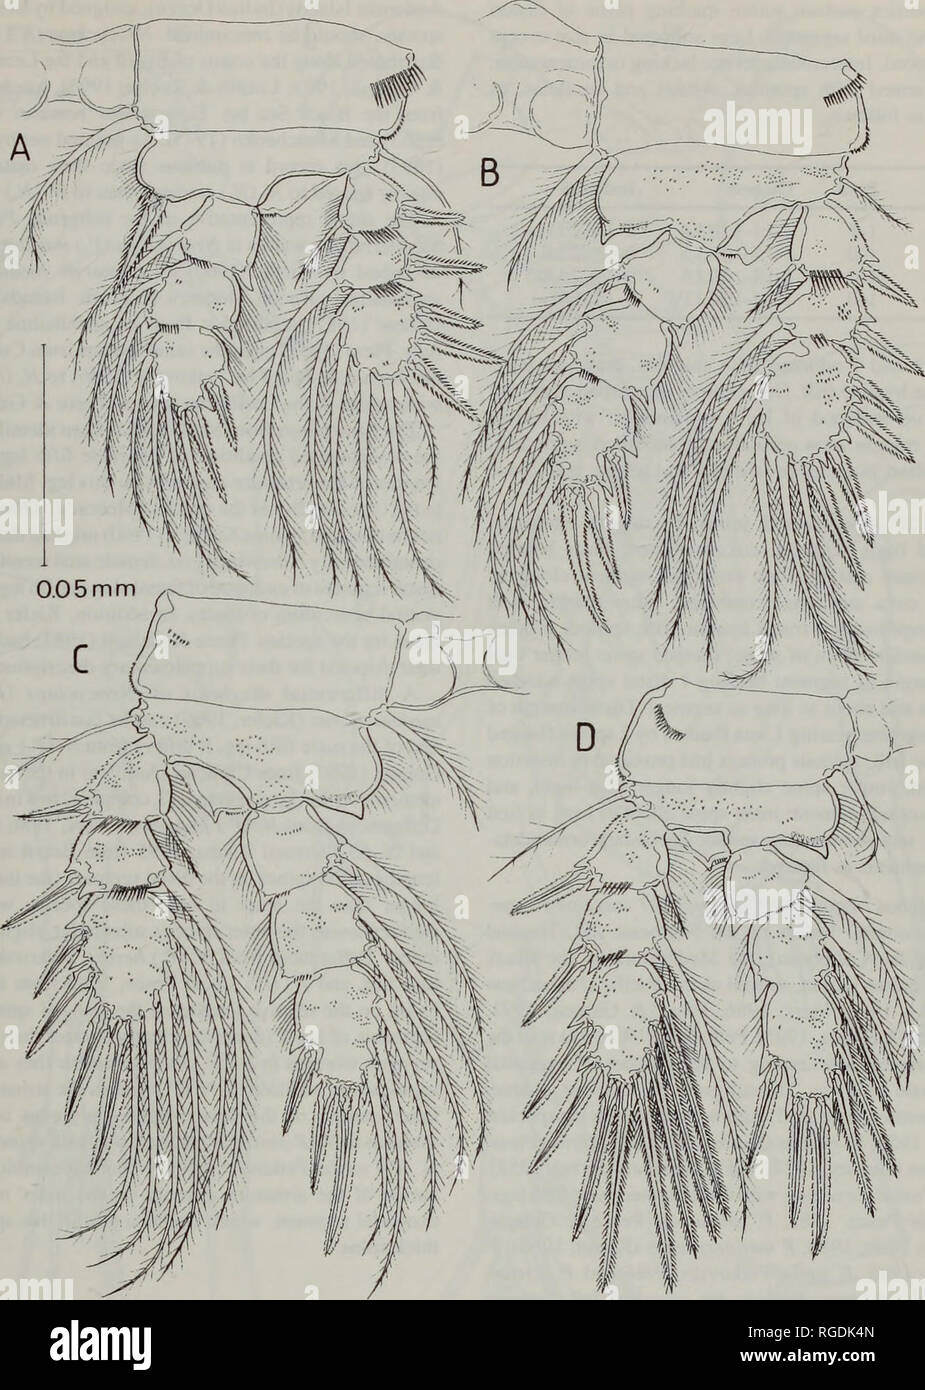 . Bulletin of the Natural History Museum Zoology. CYCLOPOIDS FROM LITTORAL CAVES 91. Fig. 7. Neocyclops (Protoneocyclops) mediterraneus (Kiefer, 1960), adult male swimming legs, posterior view. A, leg 1; B, leg 2; C, leg 3; D, leg 4. patches of tiny denticles on segment, as figured. Palp comprising coxobasis with 1 spinulate spine and 2 setae distally and 1 seta (representing exopod) implanted on outer margin, and 1-segmented endopod bearing 3 setae (obscured in Fig. 6D). Maxilla (Fig. 6E) 4-segmented, powerfully developed. Praecoxa and coxa separate. Praecoxa with single, distal endite armed  Stock Photo